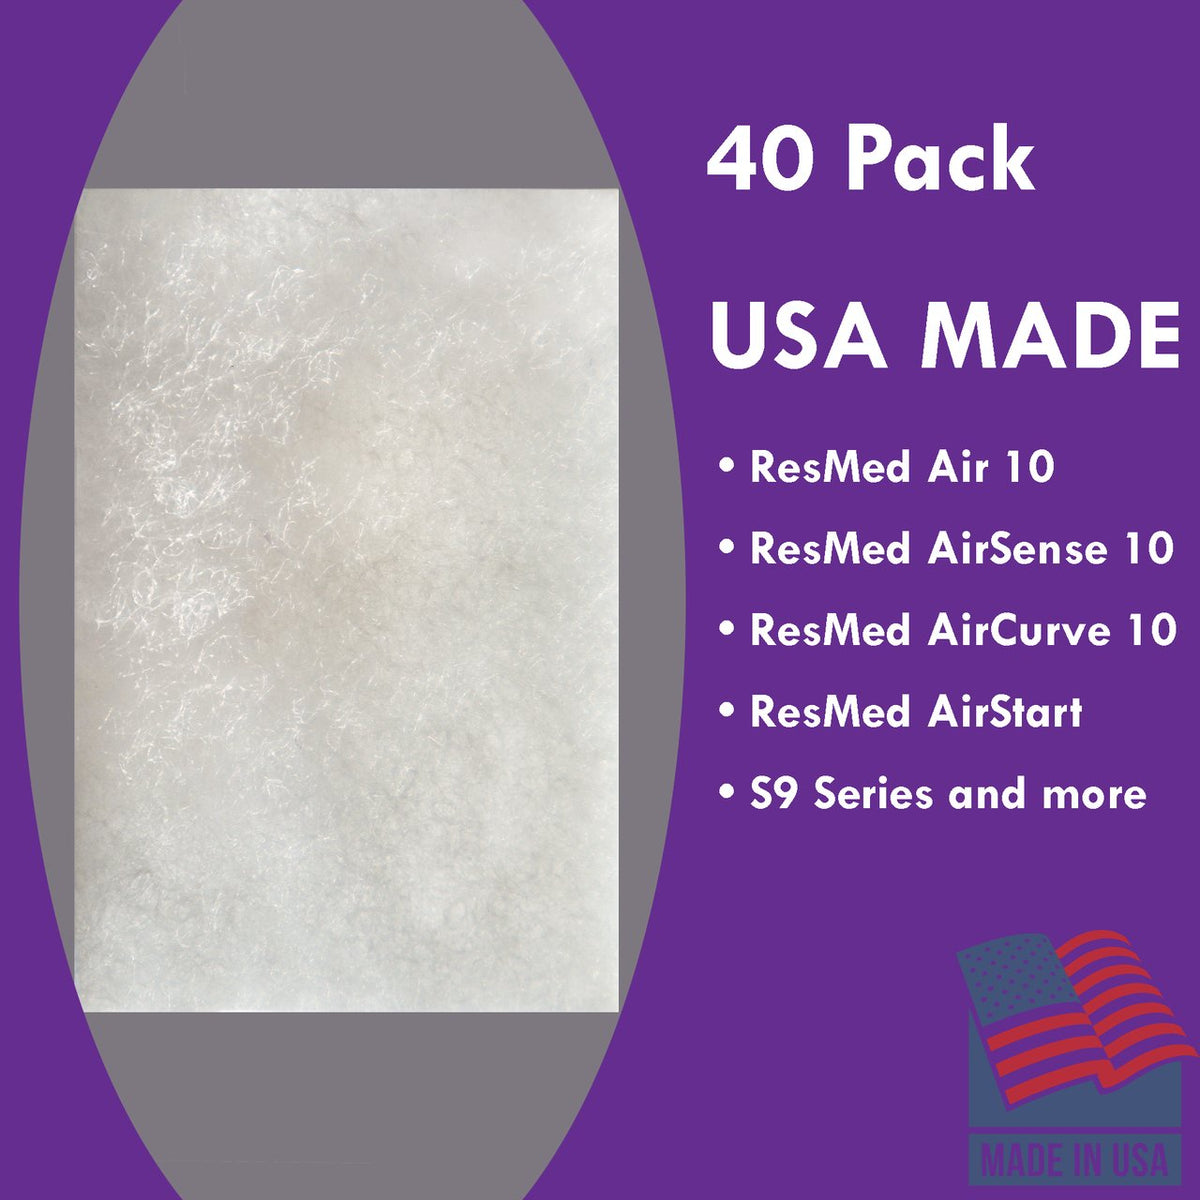 CPAP Filters Disposable Felt Pollen air Filter - Pack Standard Universal CPAP Filter Supplies - ResMed Airsense 10, Aircurve 10, S9 Series Machines - by Mars Wellness